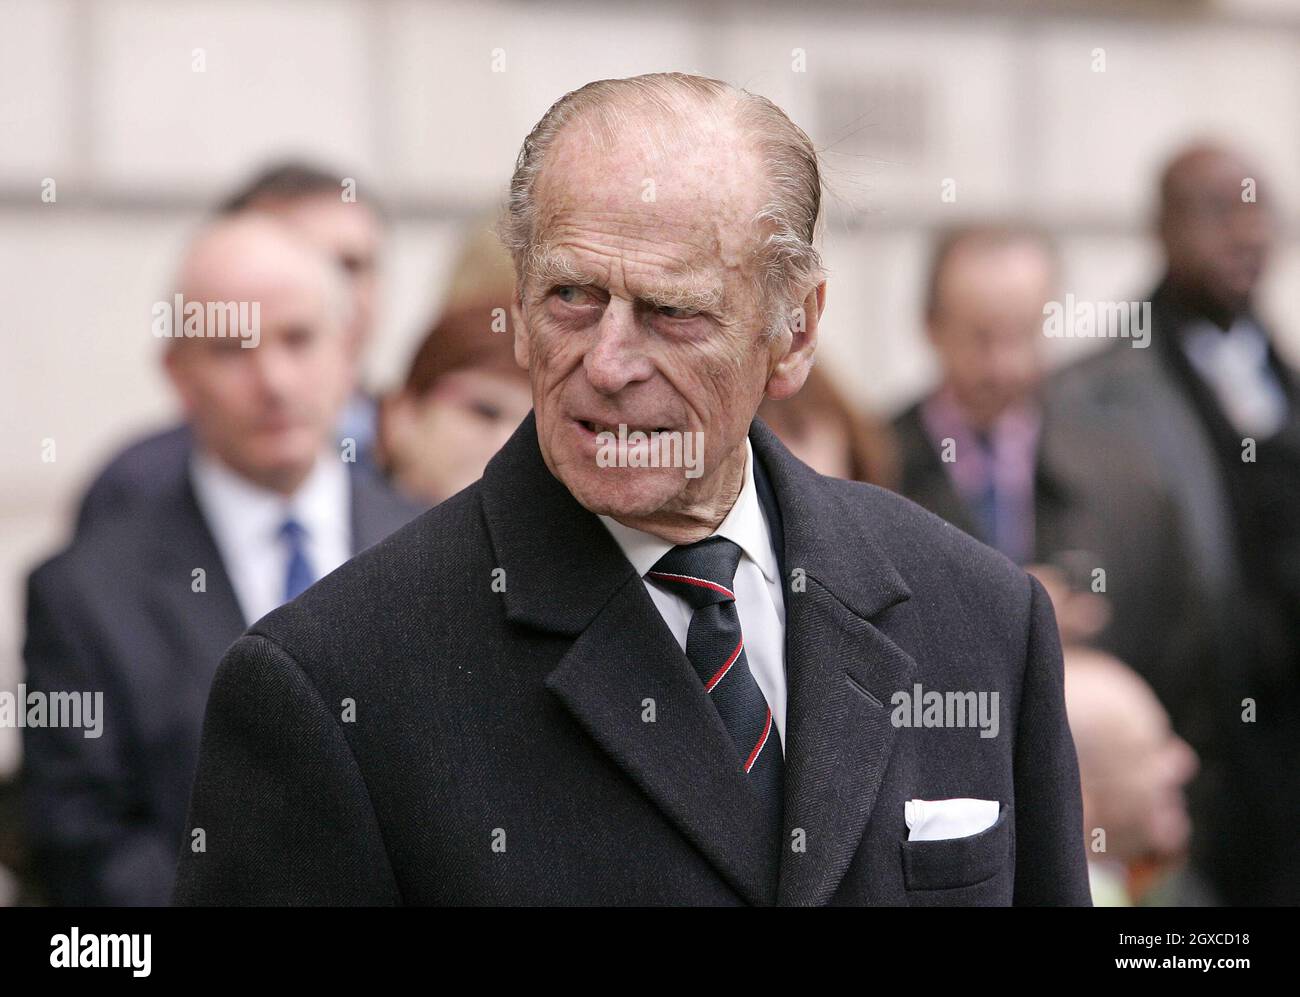 Prince Philip, Duke of Edinburgh attends the unveiling of the Jubilee Walkway panel on Parliament Square following a service of celebration for their diamond wedding anniversary at Westminster Abbey in London. Stock Photo